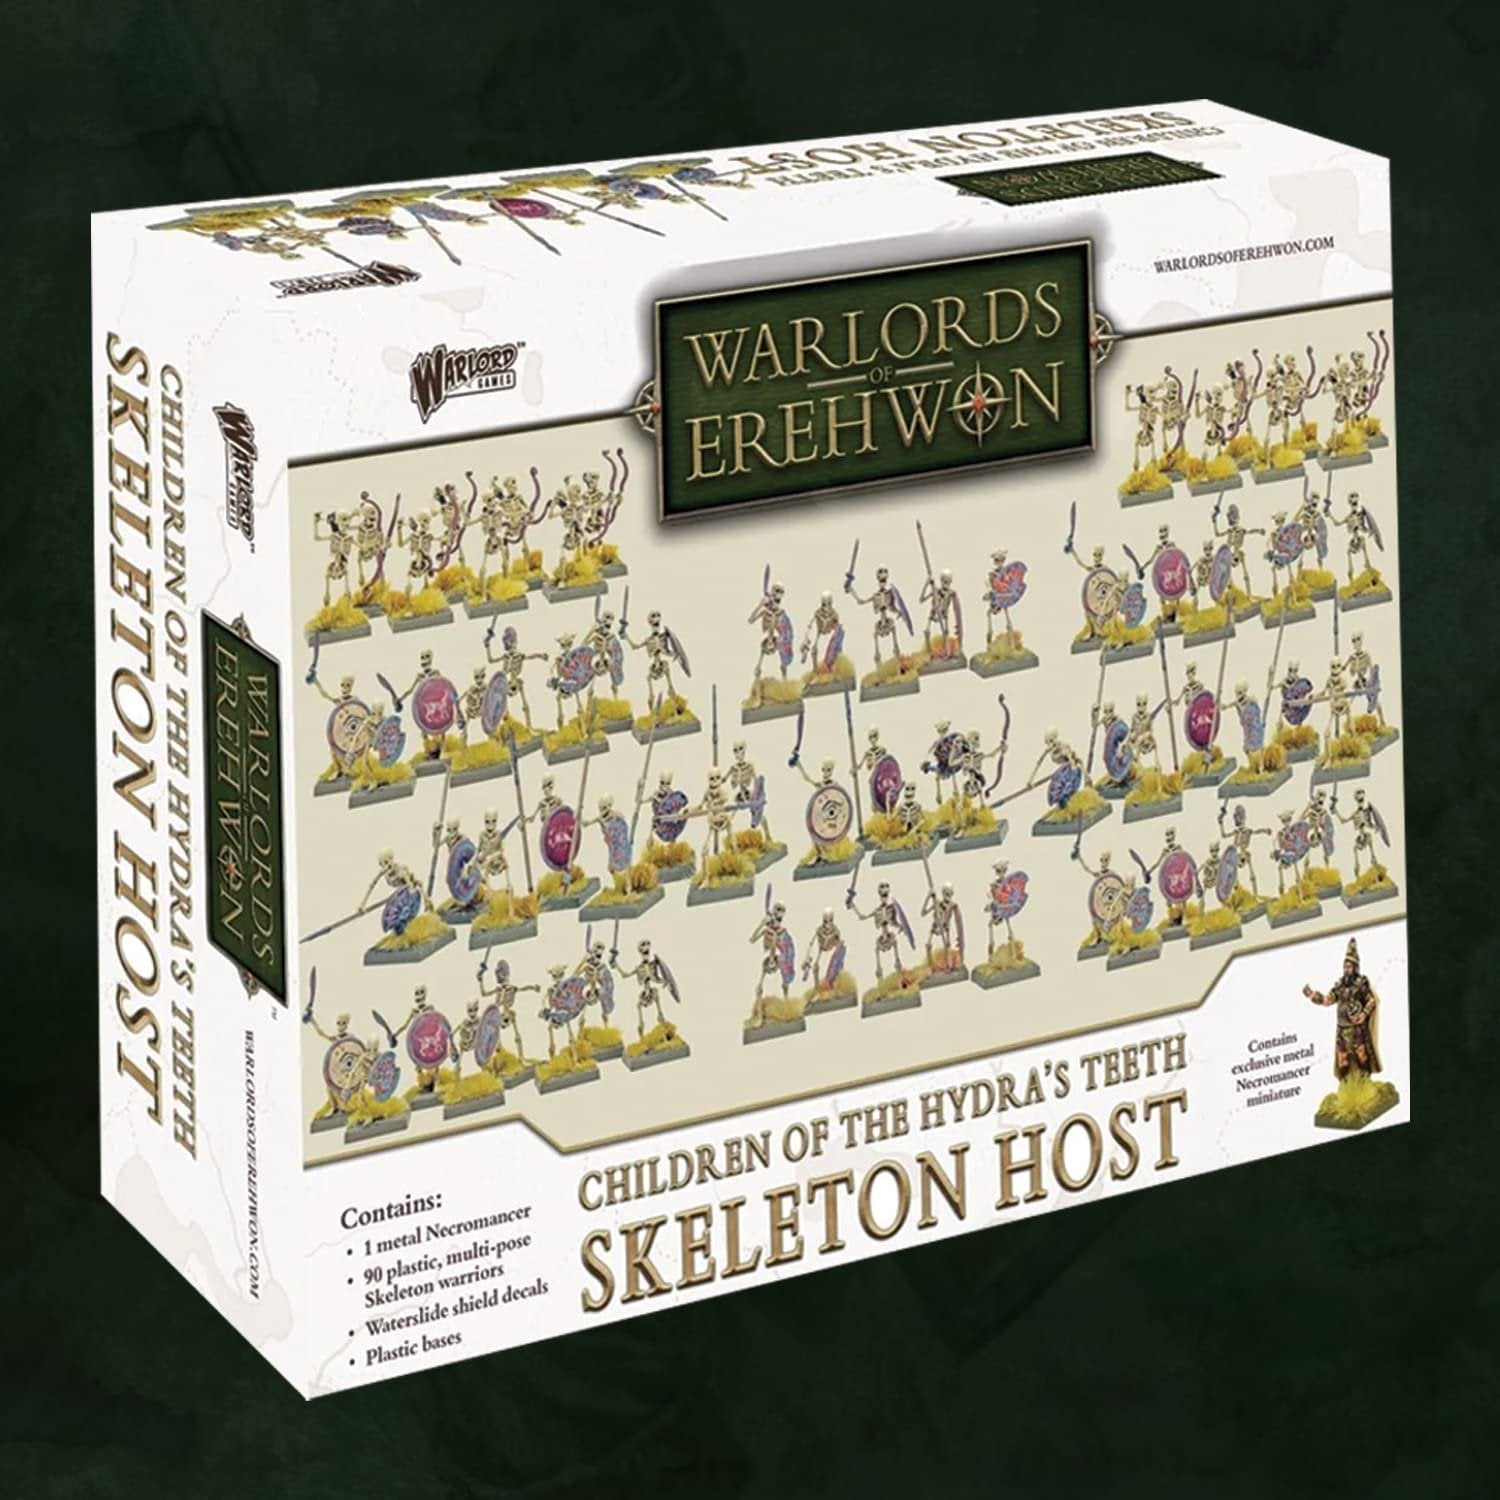 Warlords of Erehwon: Children of The Hydra's Teeth: Skeleton Host